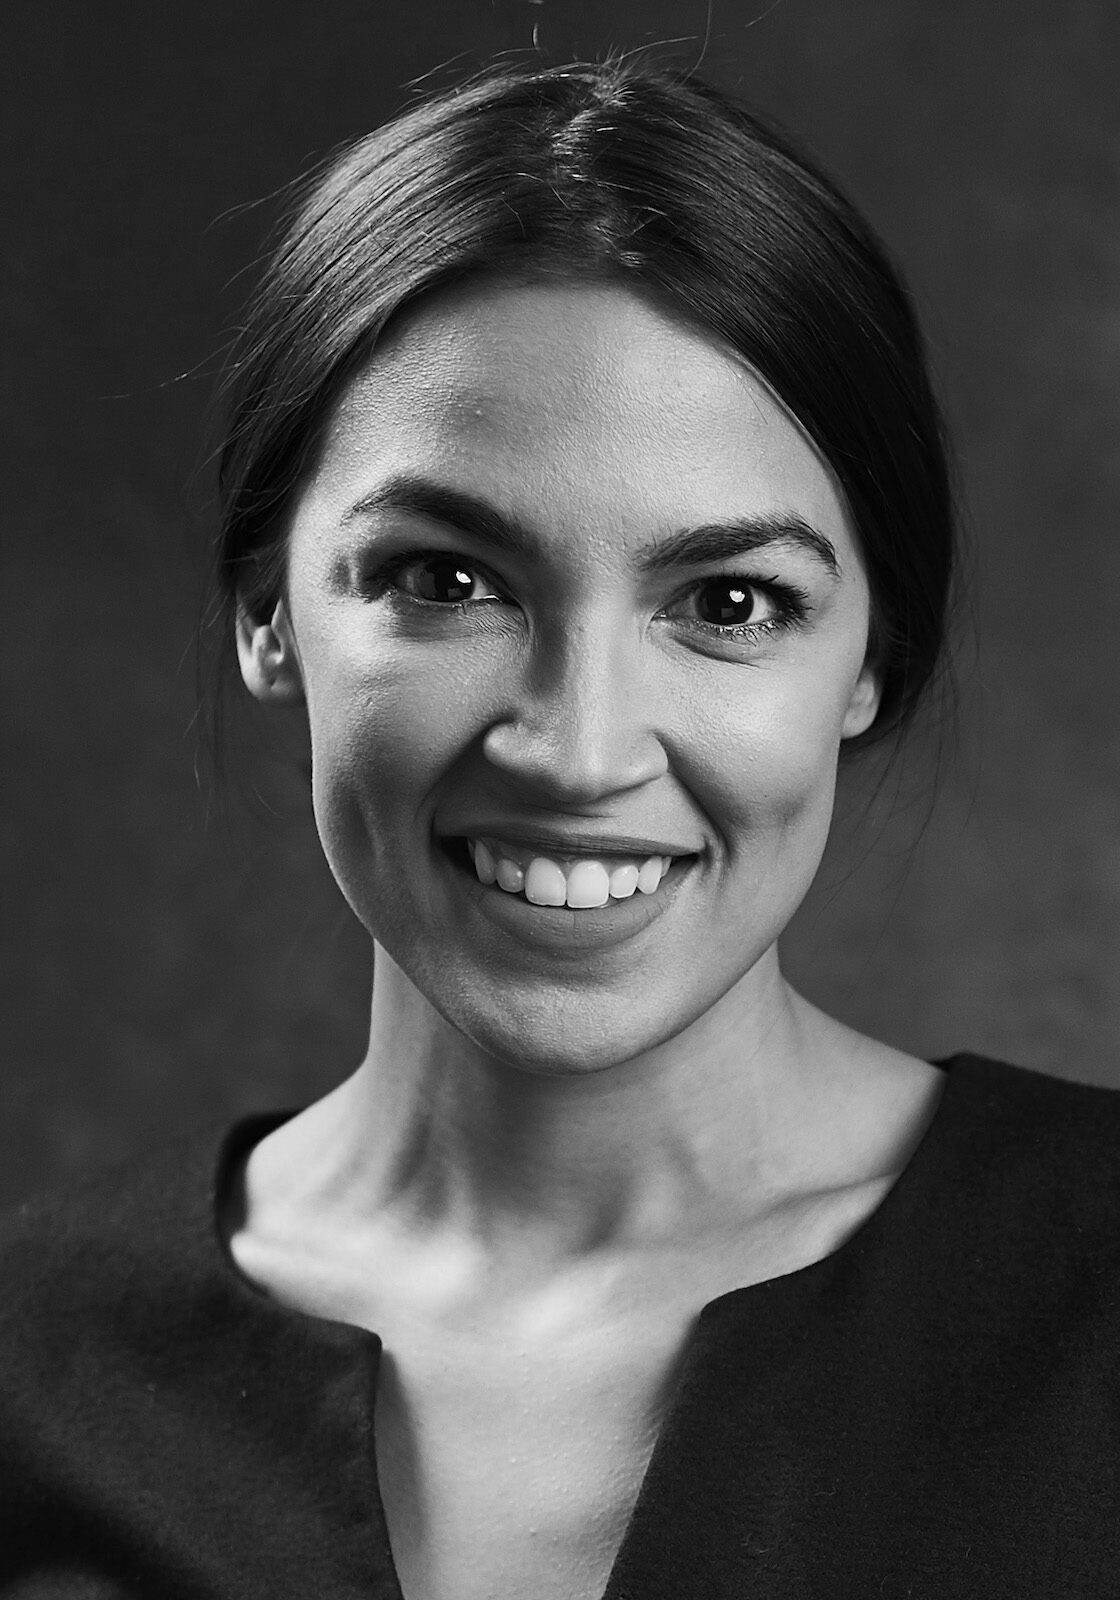 Alexandria Ocasio-CortezRunning for U.S. Rep., 14th District (NY)